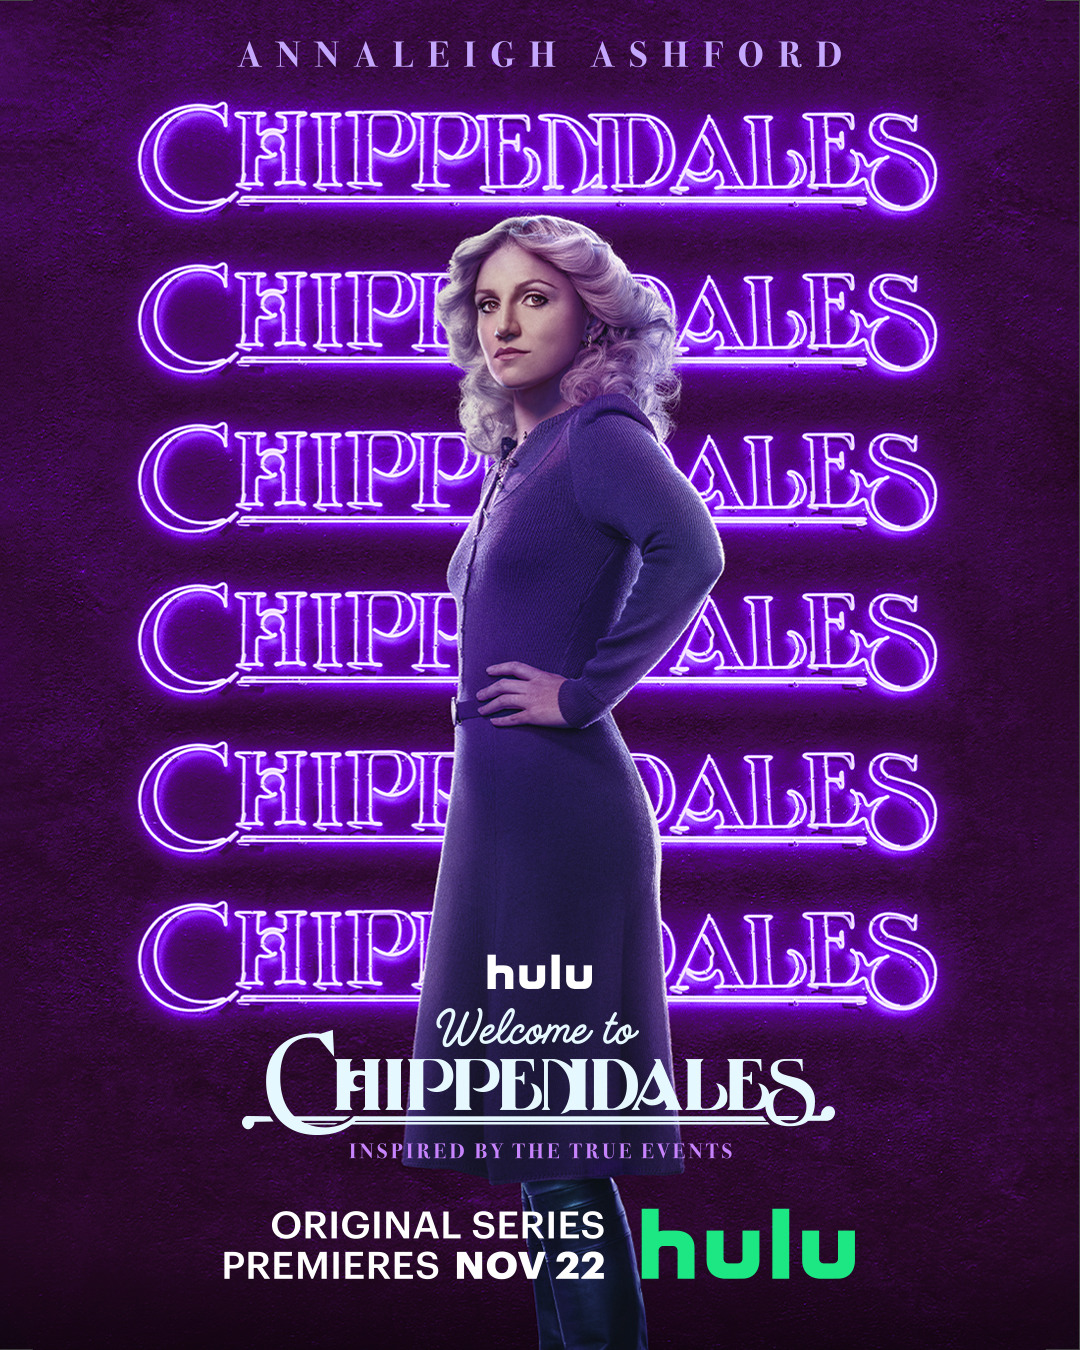 Extra Large TV Poster Image for Welcome to Chippendales (#5 of 10)